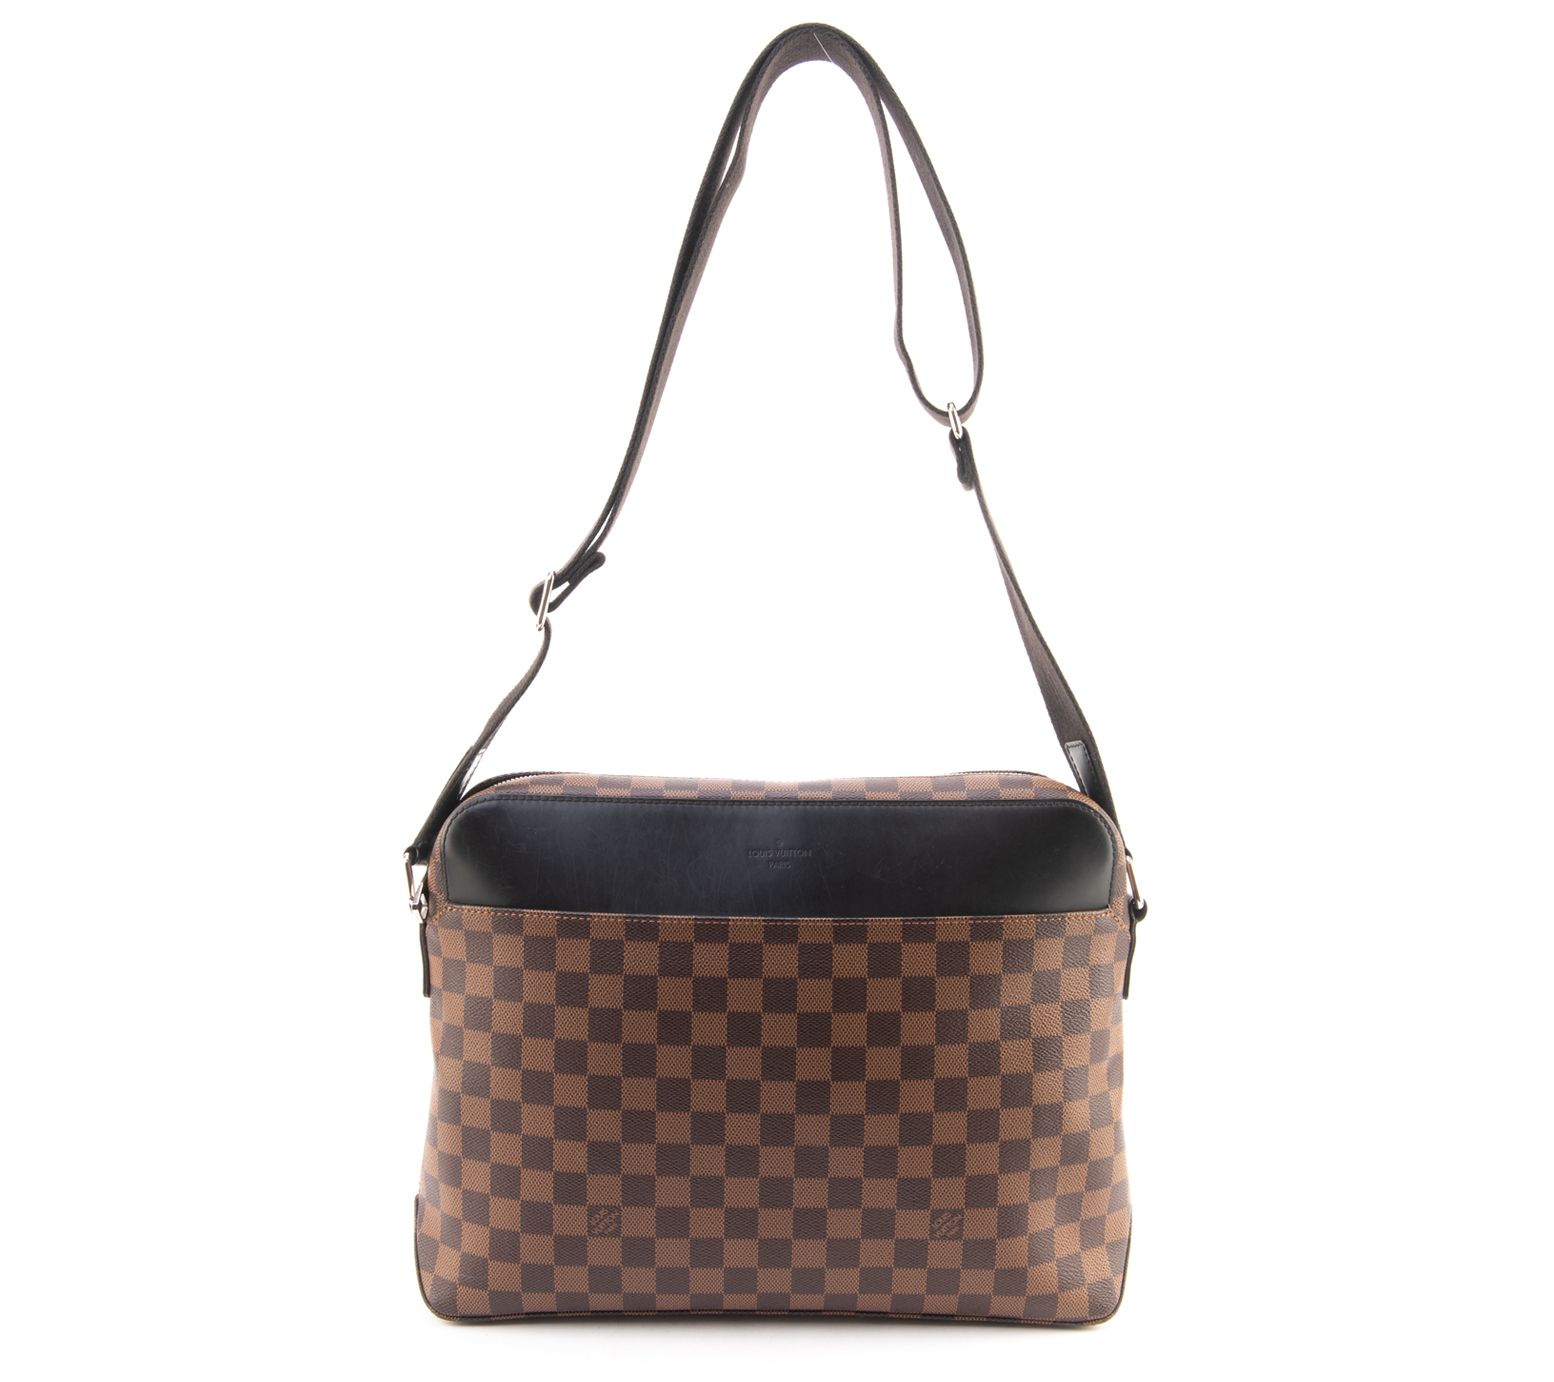 Louis Vuitton on X: Coolly sophisticated by day, casually chic by